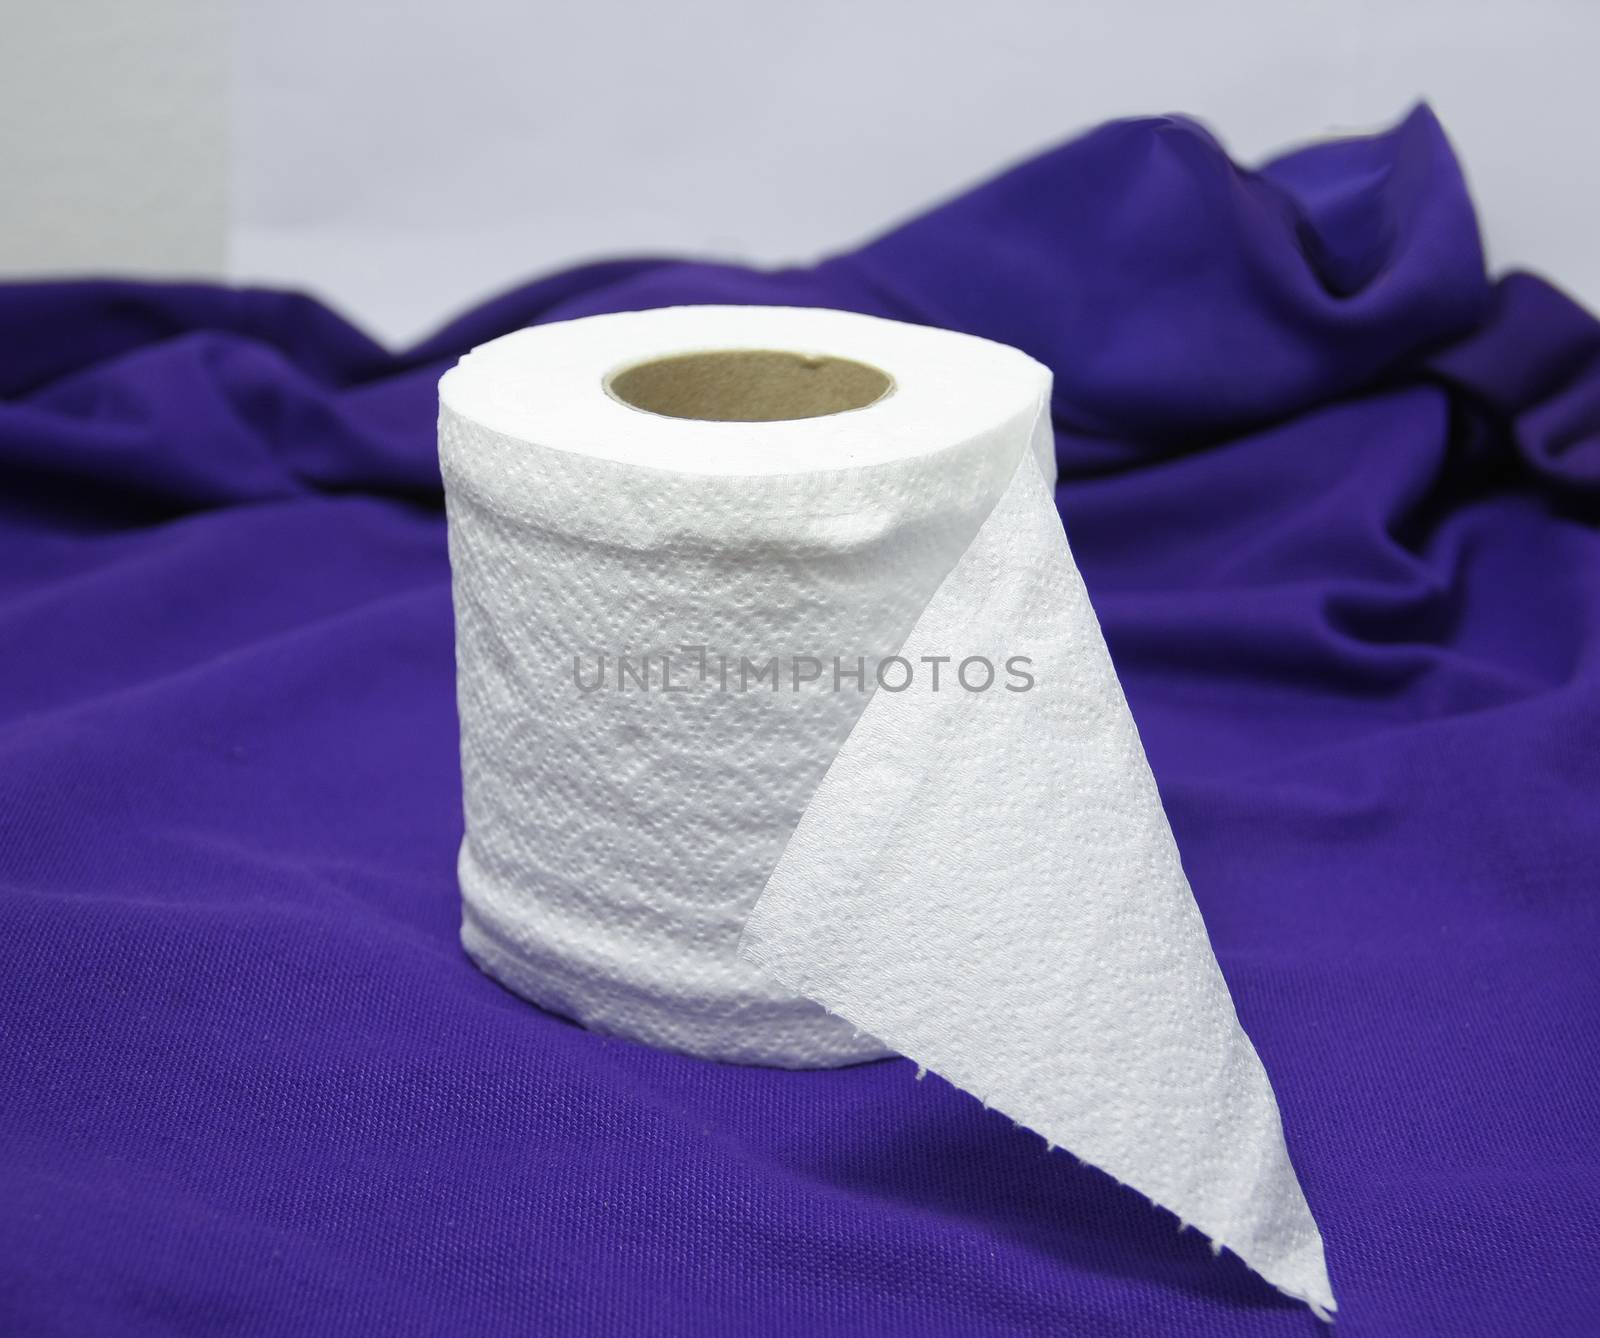 roll fresh tissue on purple cloth for convenience